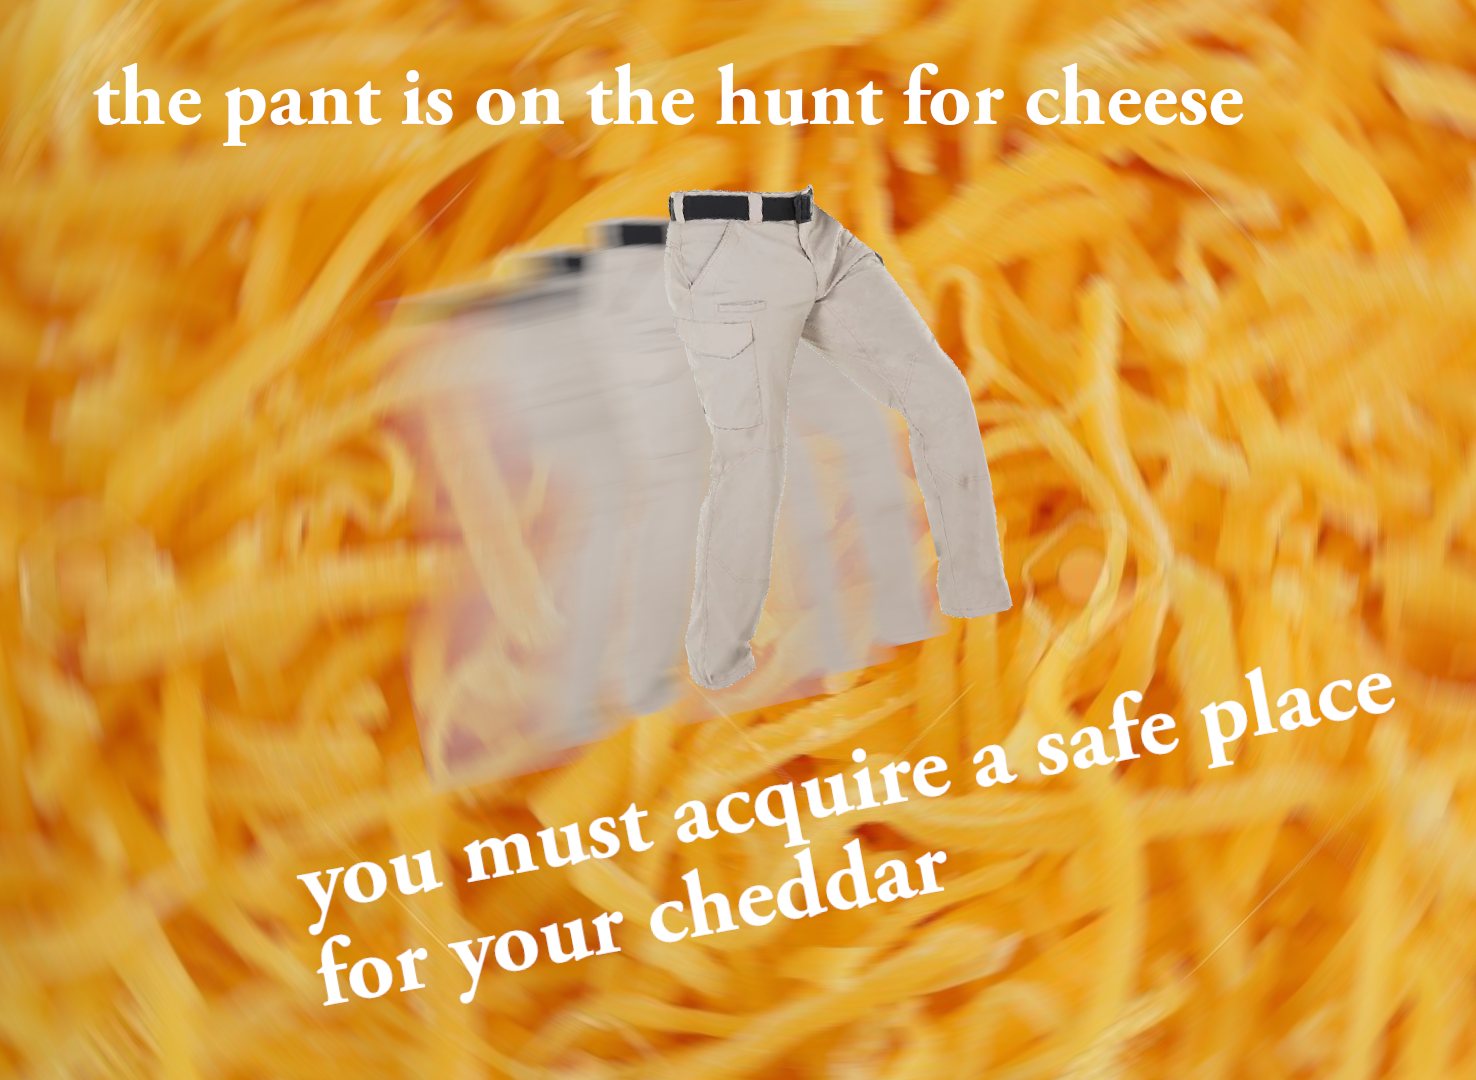 pant is on the hunt for cheese - the pant is on the hunt for cheese you must acquire a safe place for your cheddar